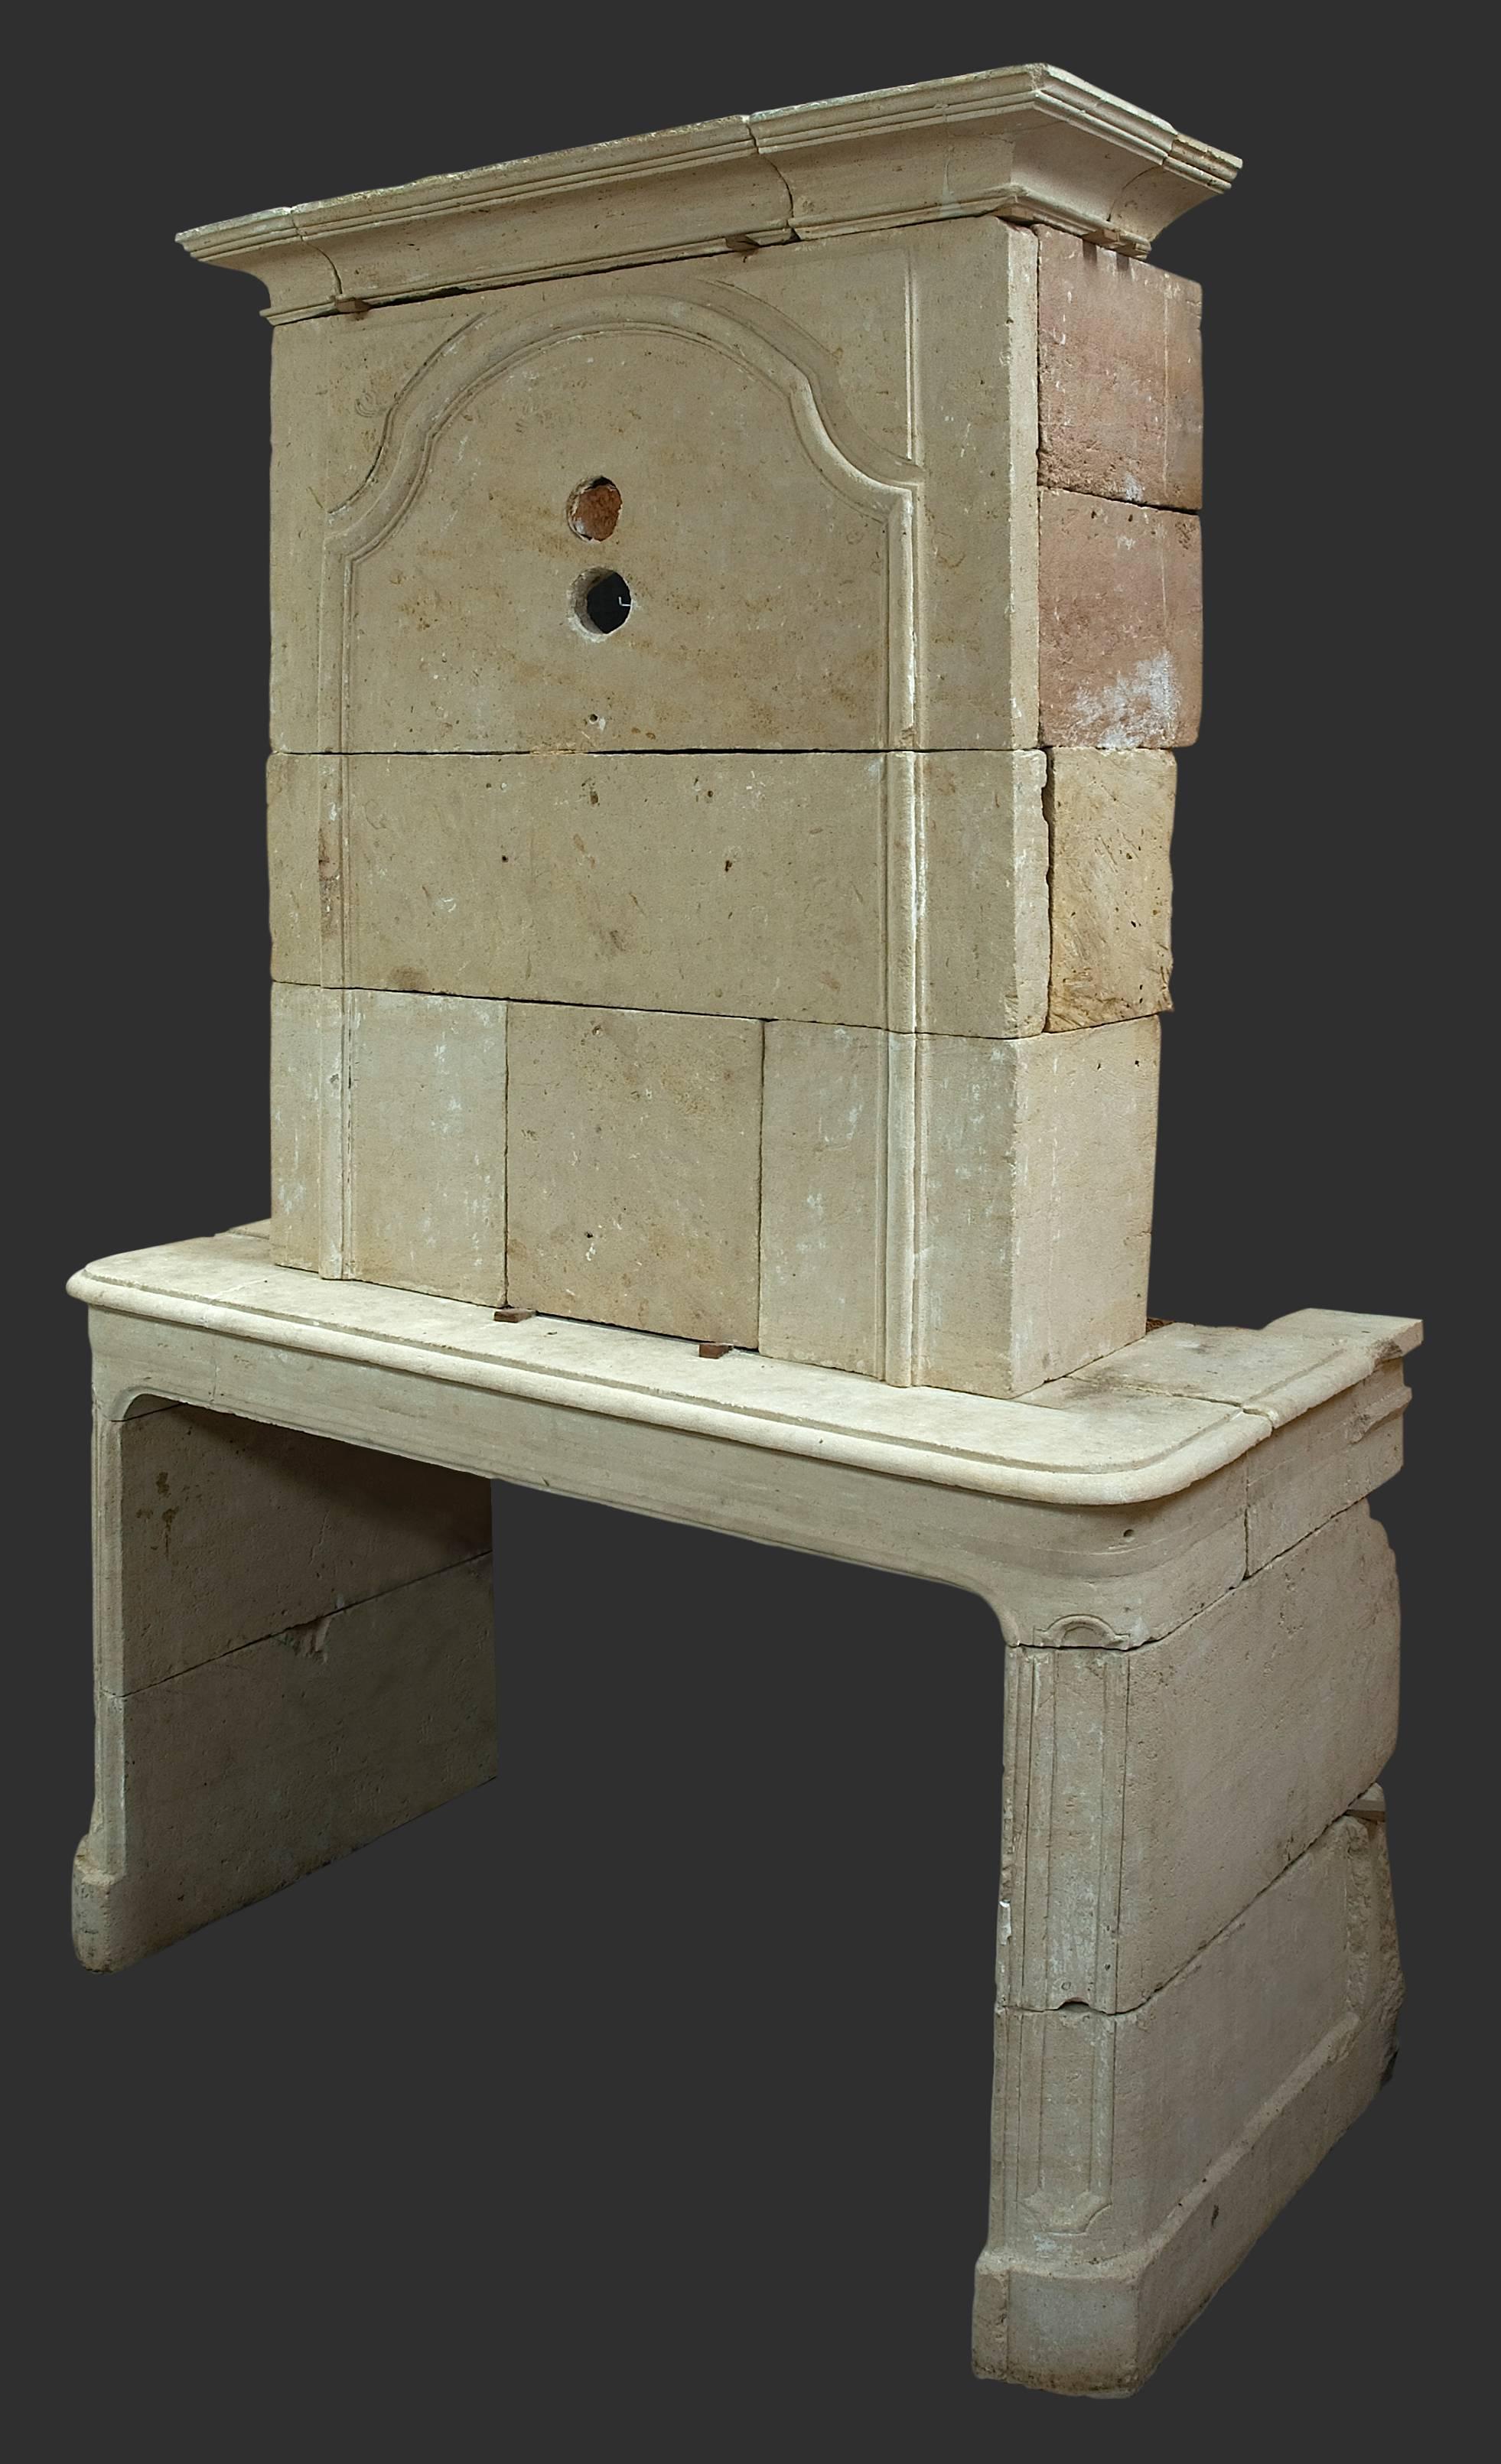 This 18th century French chimneypiece is made from sandstone and has its original Trumeau or upper piece. It’s a fine example of the Louis XIV style which originates from the reign of the famous Sun King who build Versailles. The elegant proportions